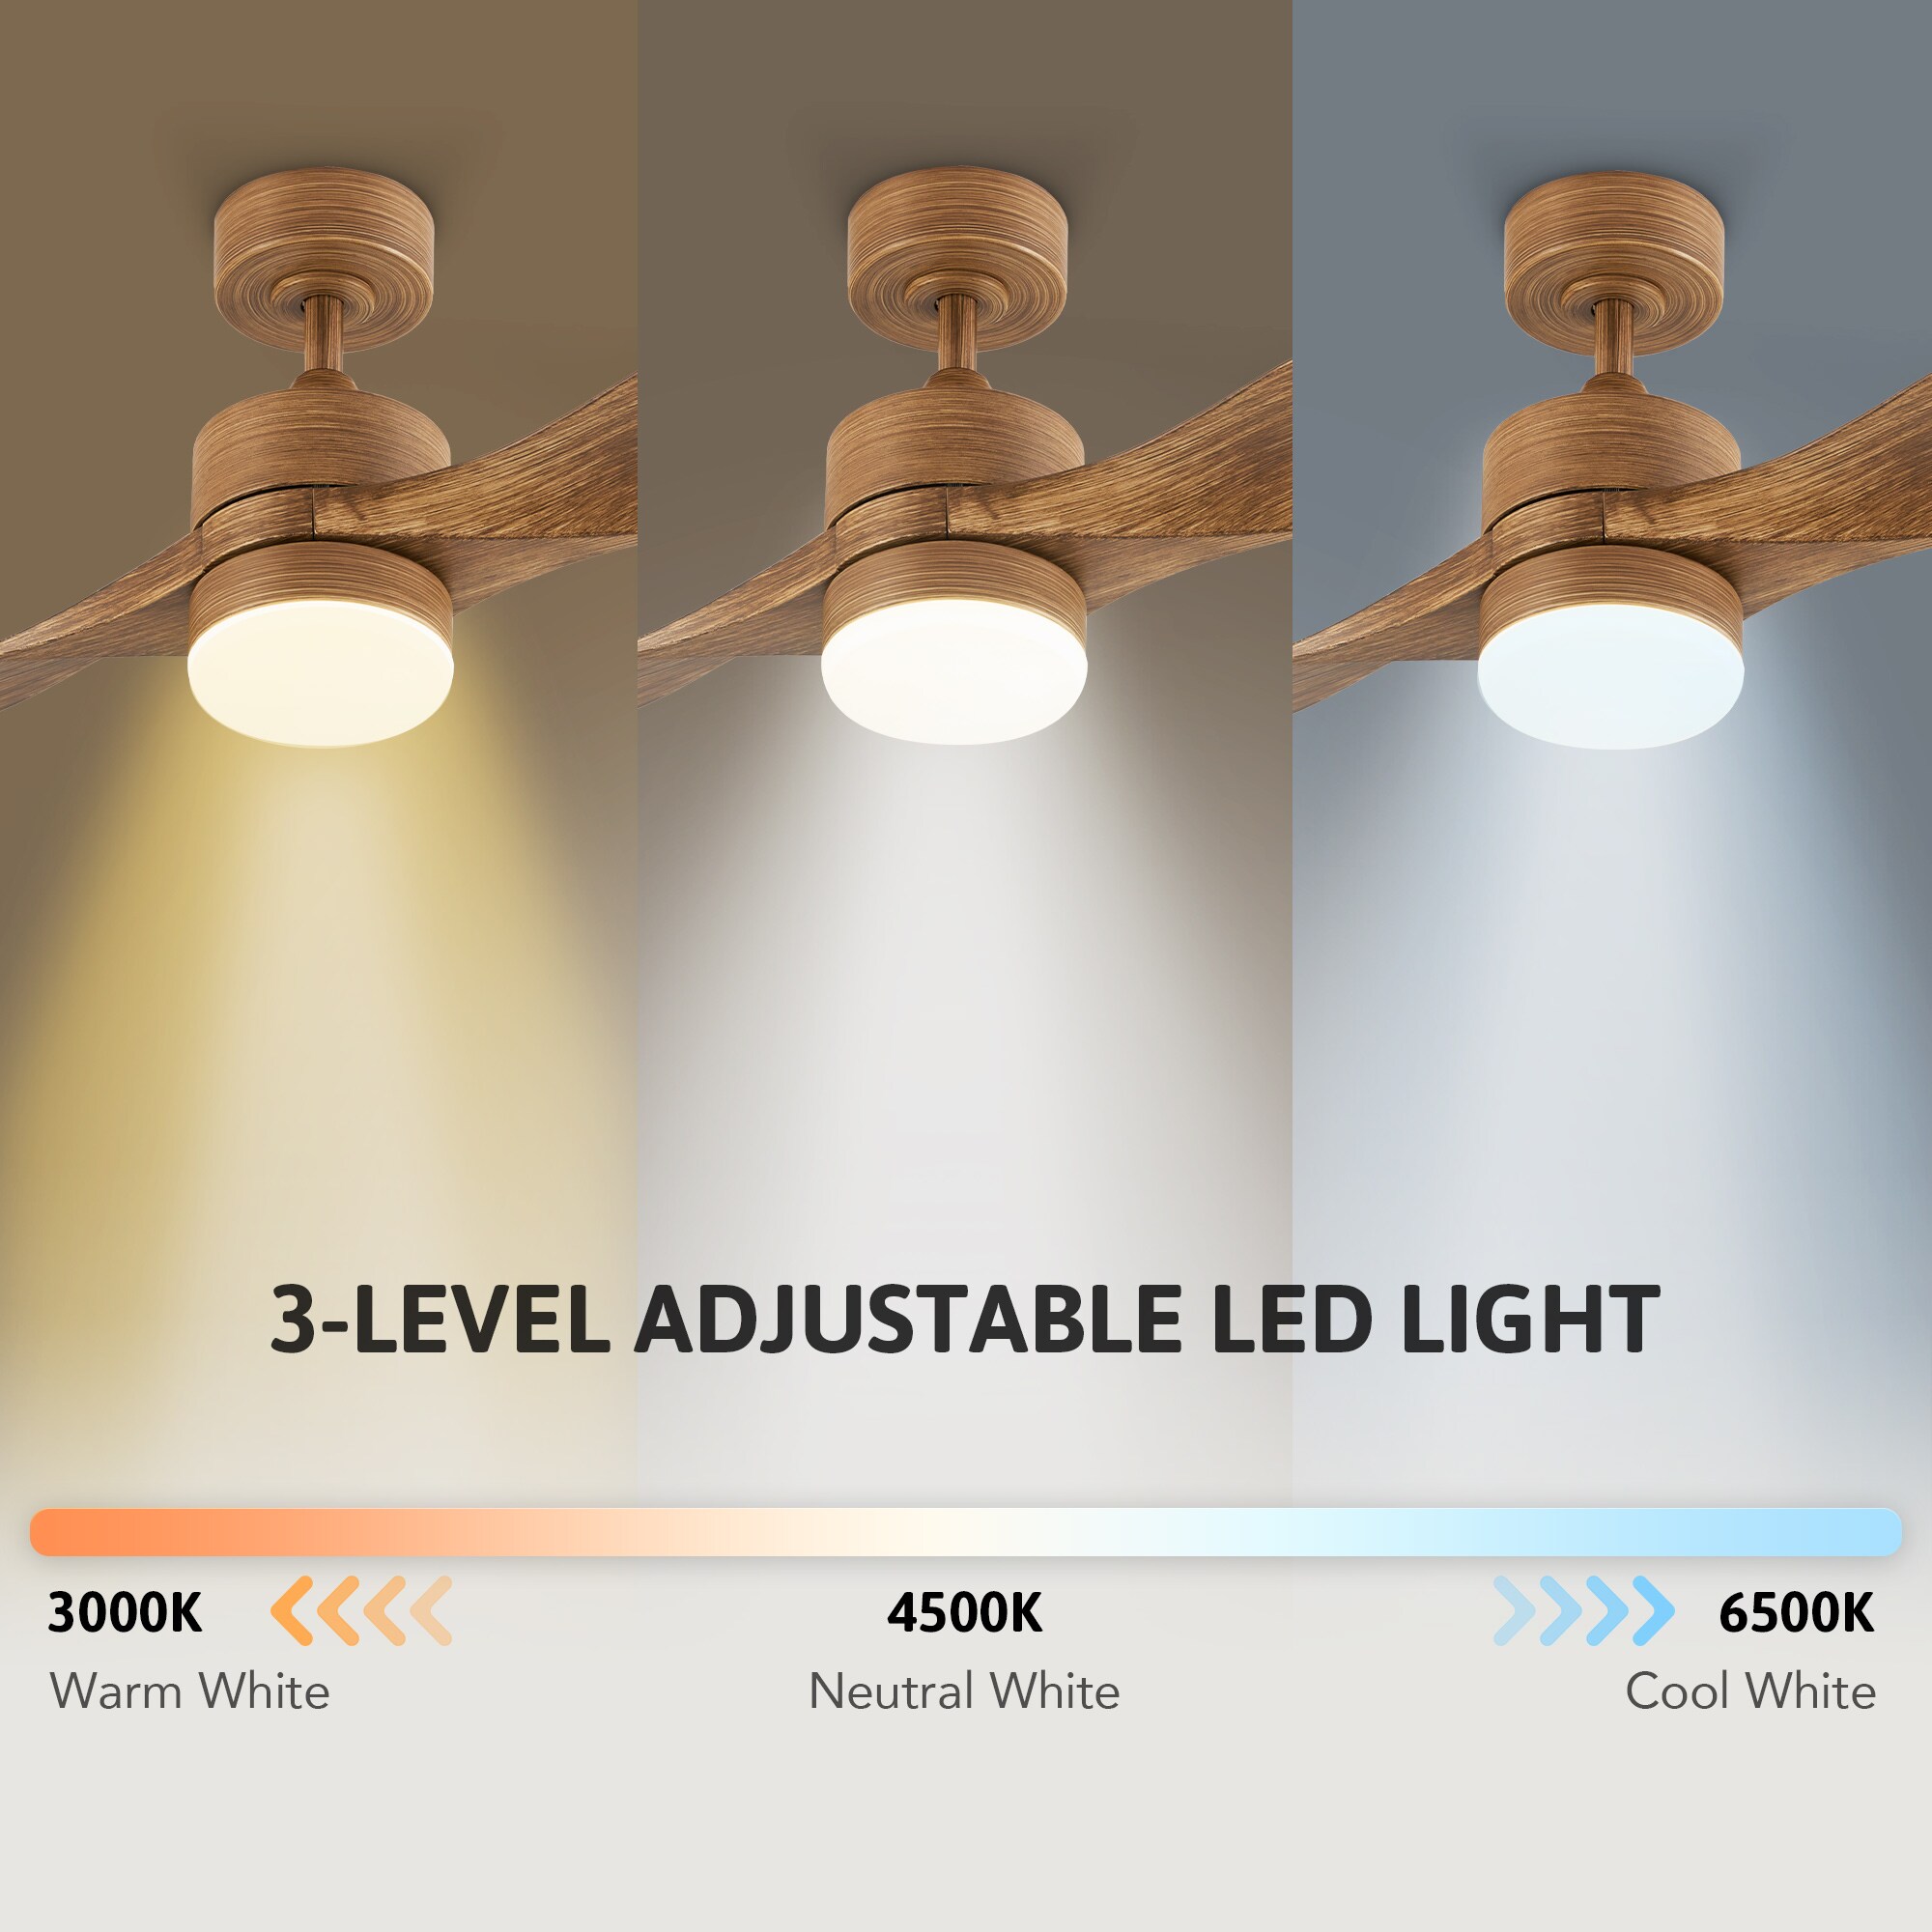 CO-Z 42 in 2-Blade Ceiling Fan with LED Lights at Lowes.com